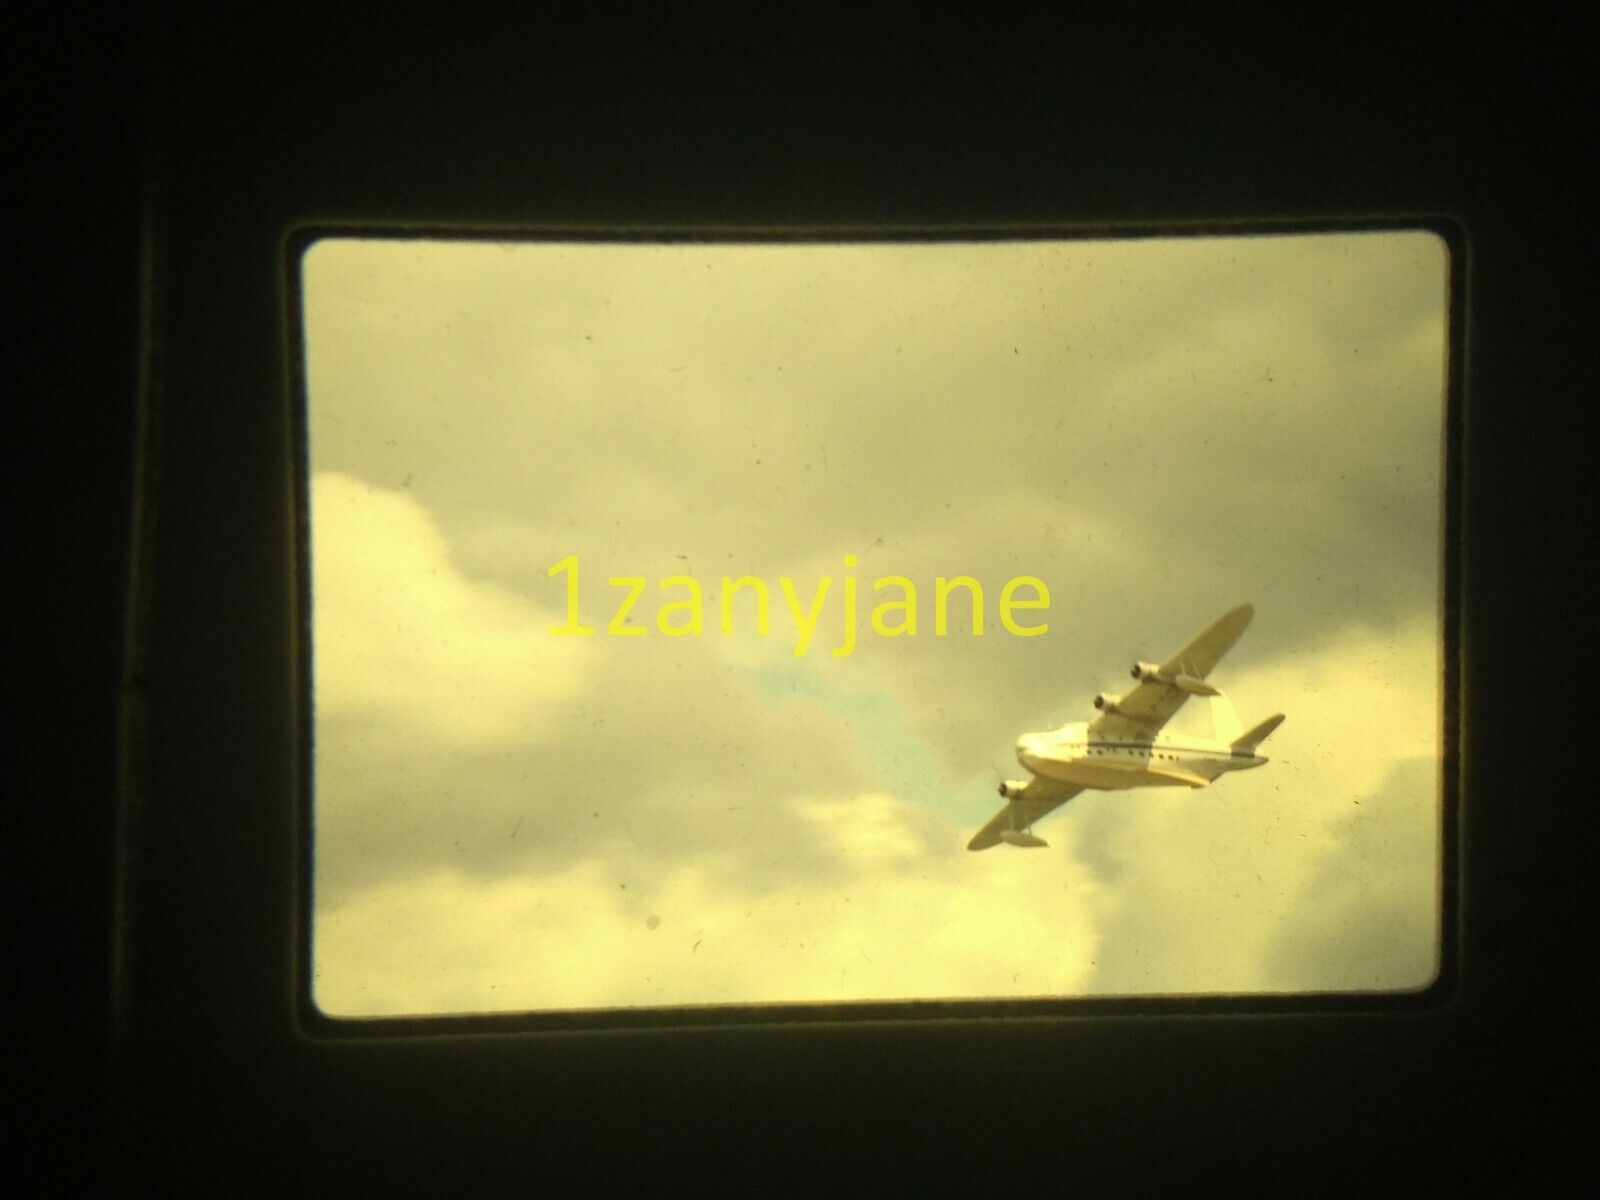 3G15 VINTAGE Photo 35mm Slide UNDERSIDE OF FIGHTER JET FROM GROUND CLOUDY SKIES